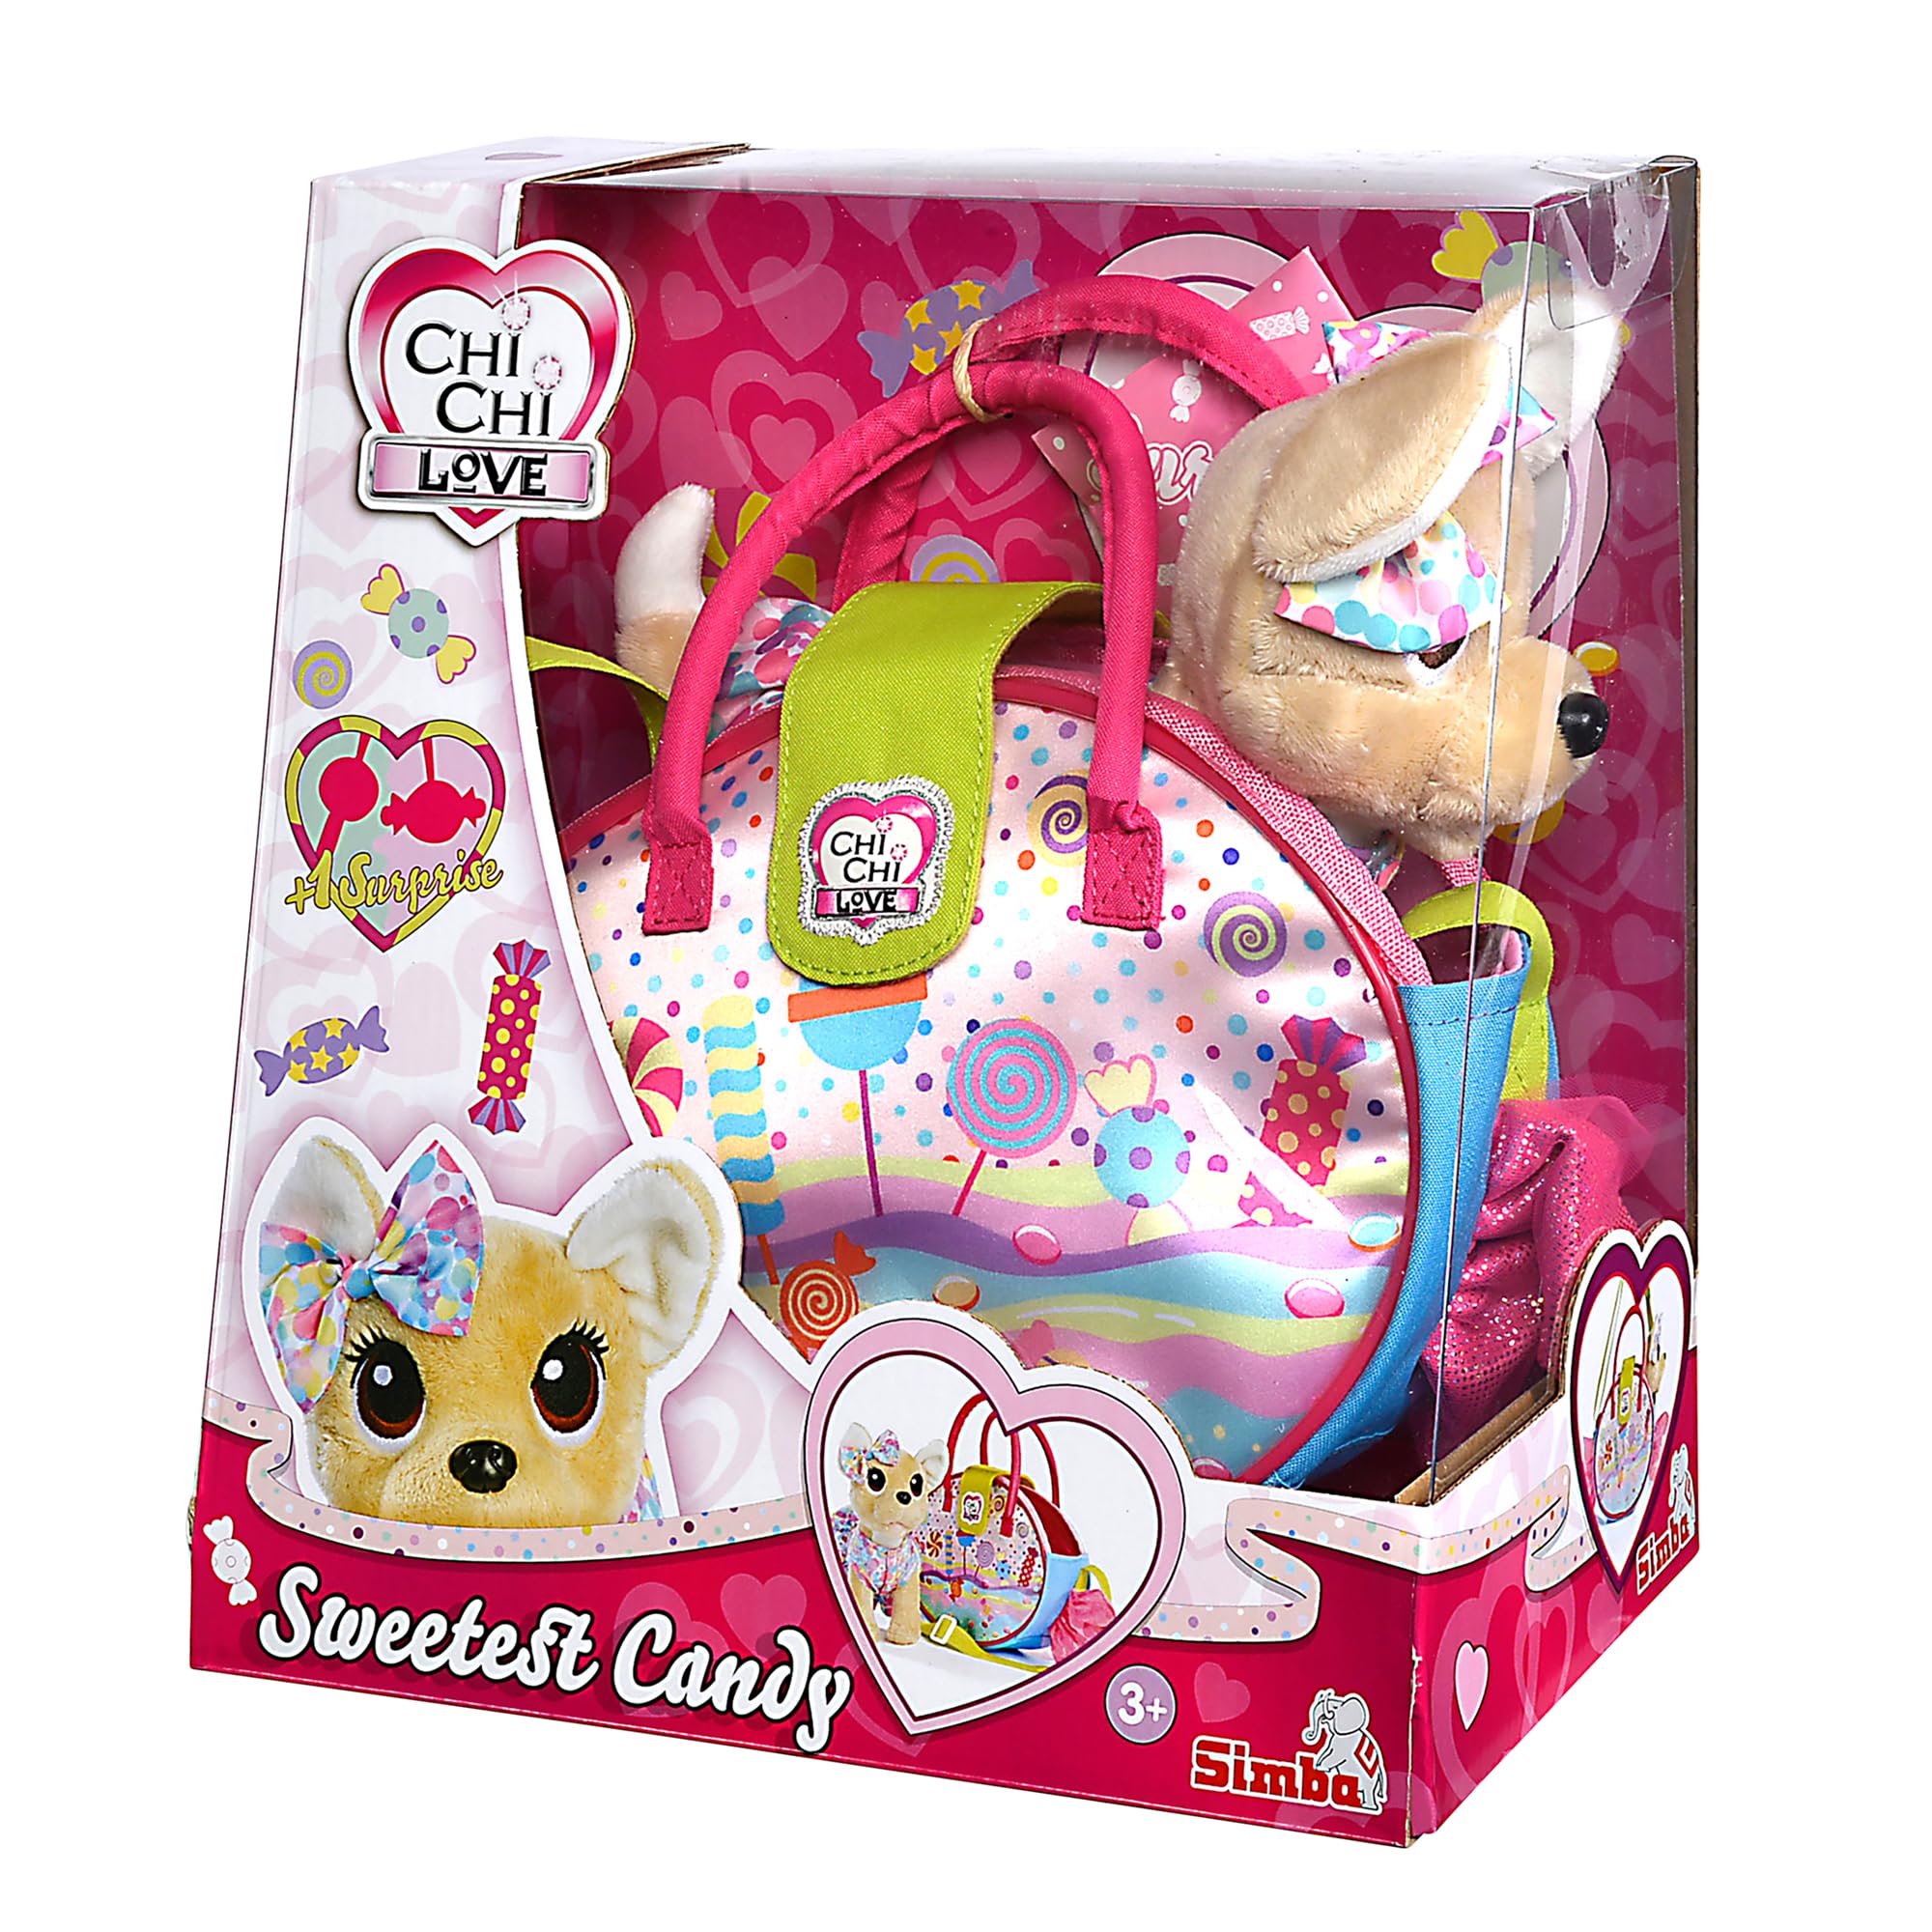 CHI CHI LOVE SWEETEST CANDY 105890001 N55123